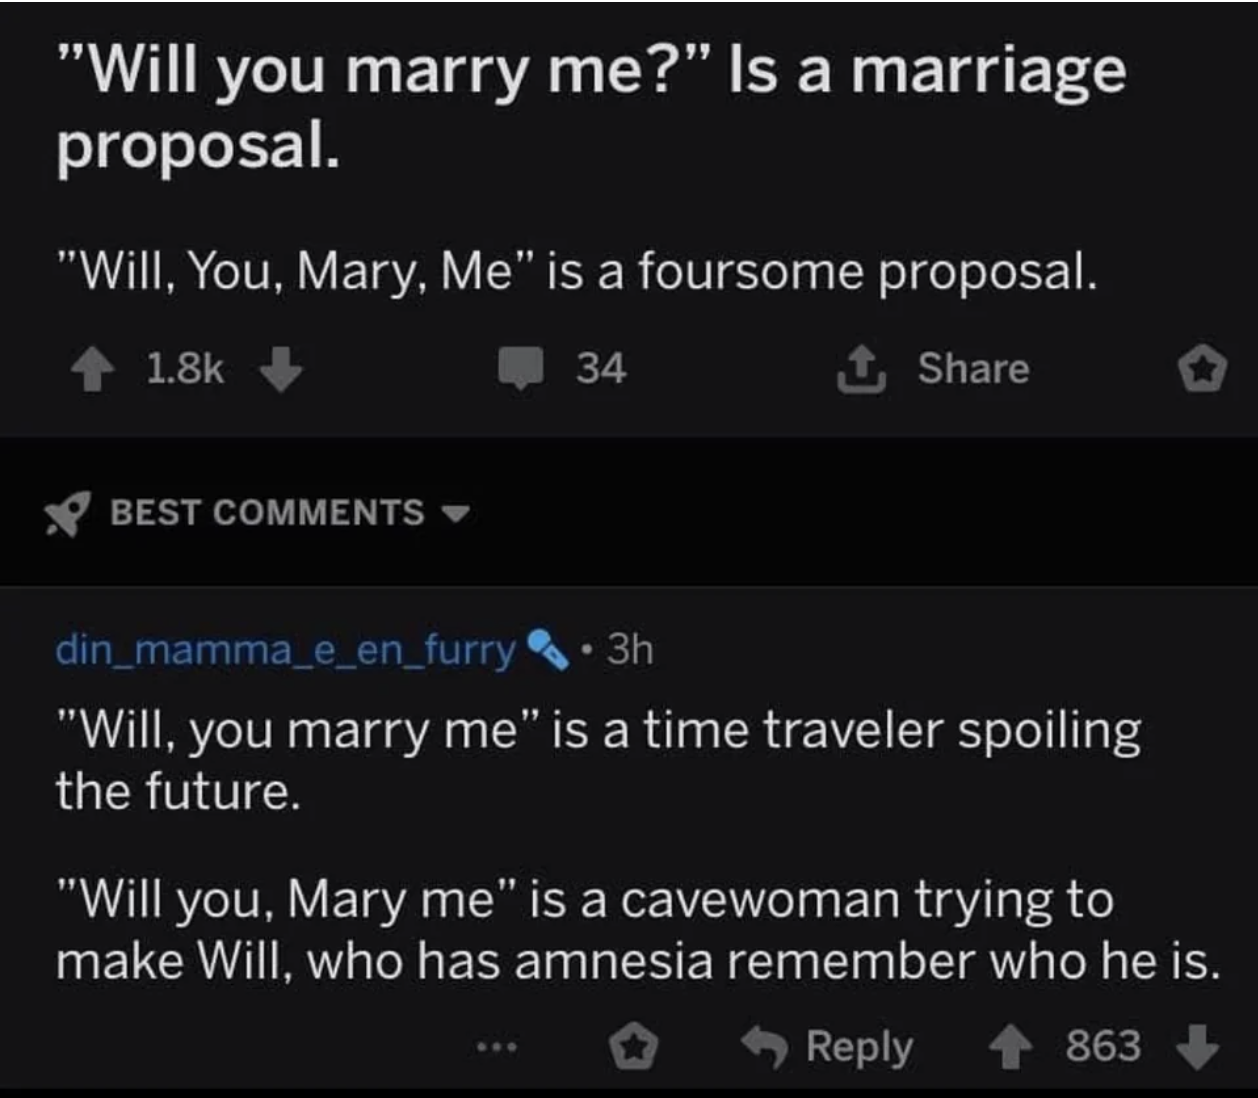 The joke says "will you marry me" is a foursome proposal if you break up the words individually; a commenter says "will you, Mary me" is a cavewoman trying to make an amnesiac named Will remember both her and himself